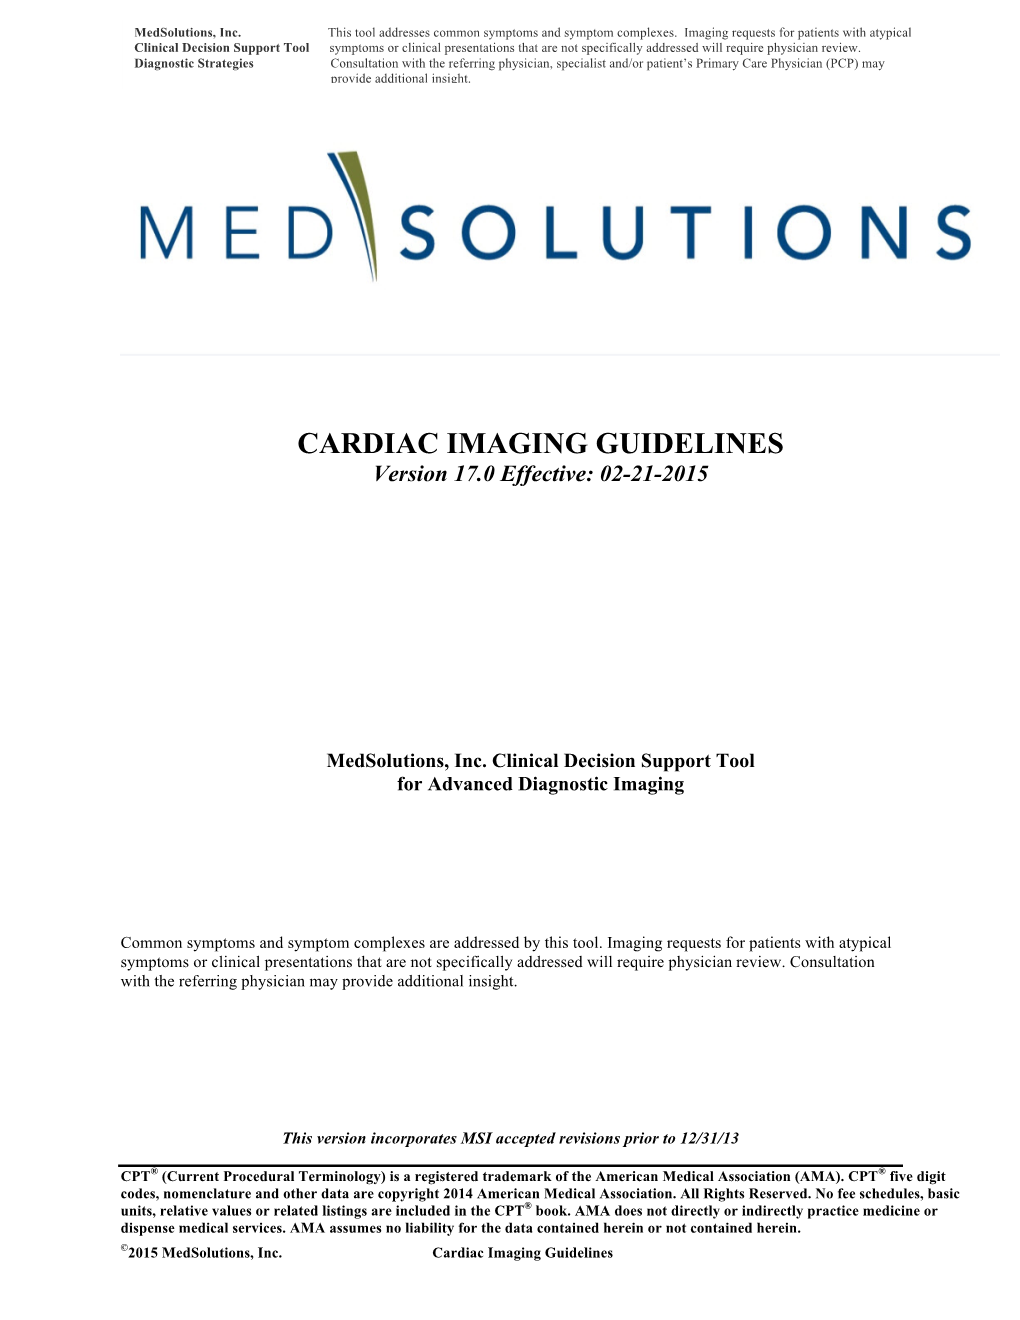 CARDIAC IMAGING GUIDELINES Version 17.0 Effective: 02-21-2015